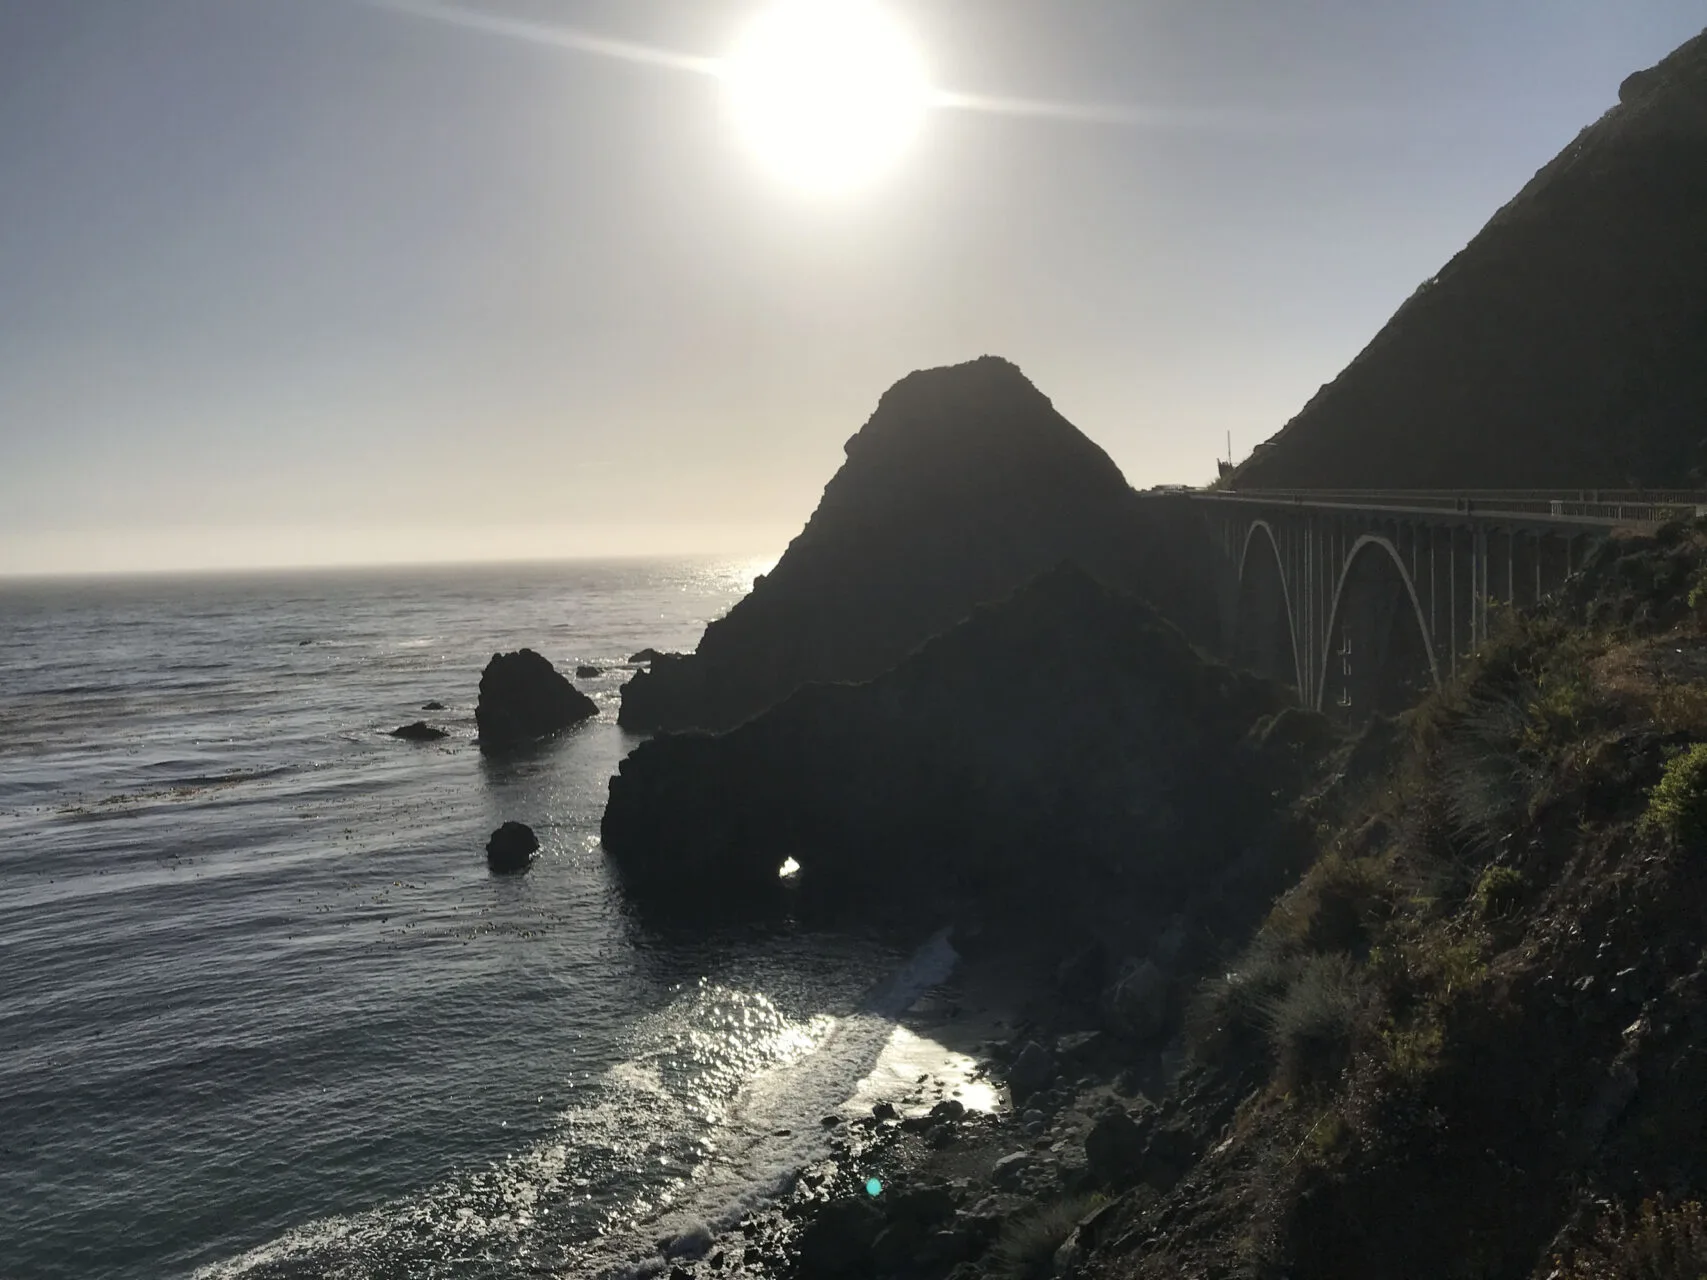 Sunset at Big Creek Bridge in Big Sur, a must-see on the PCH.